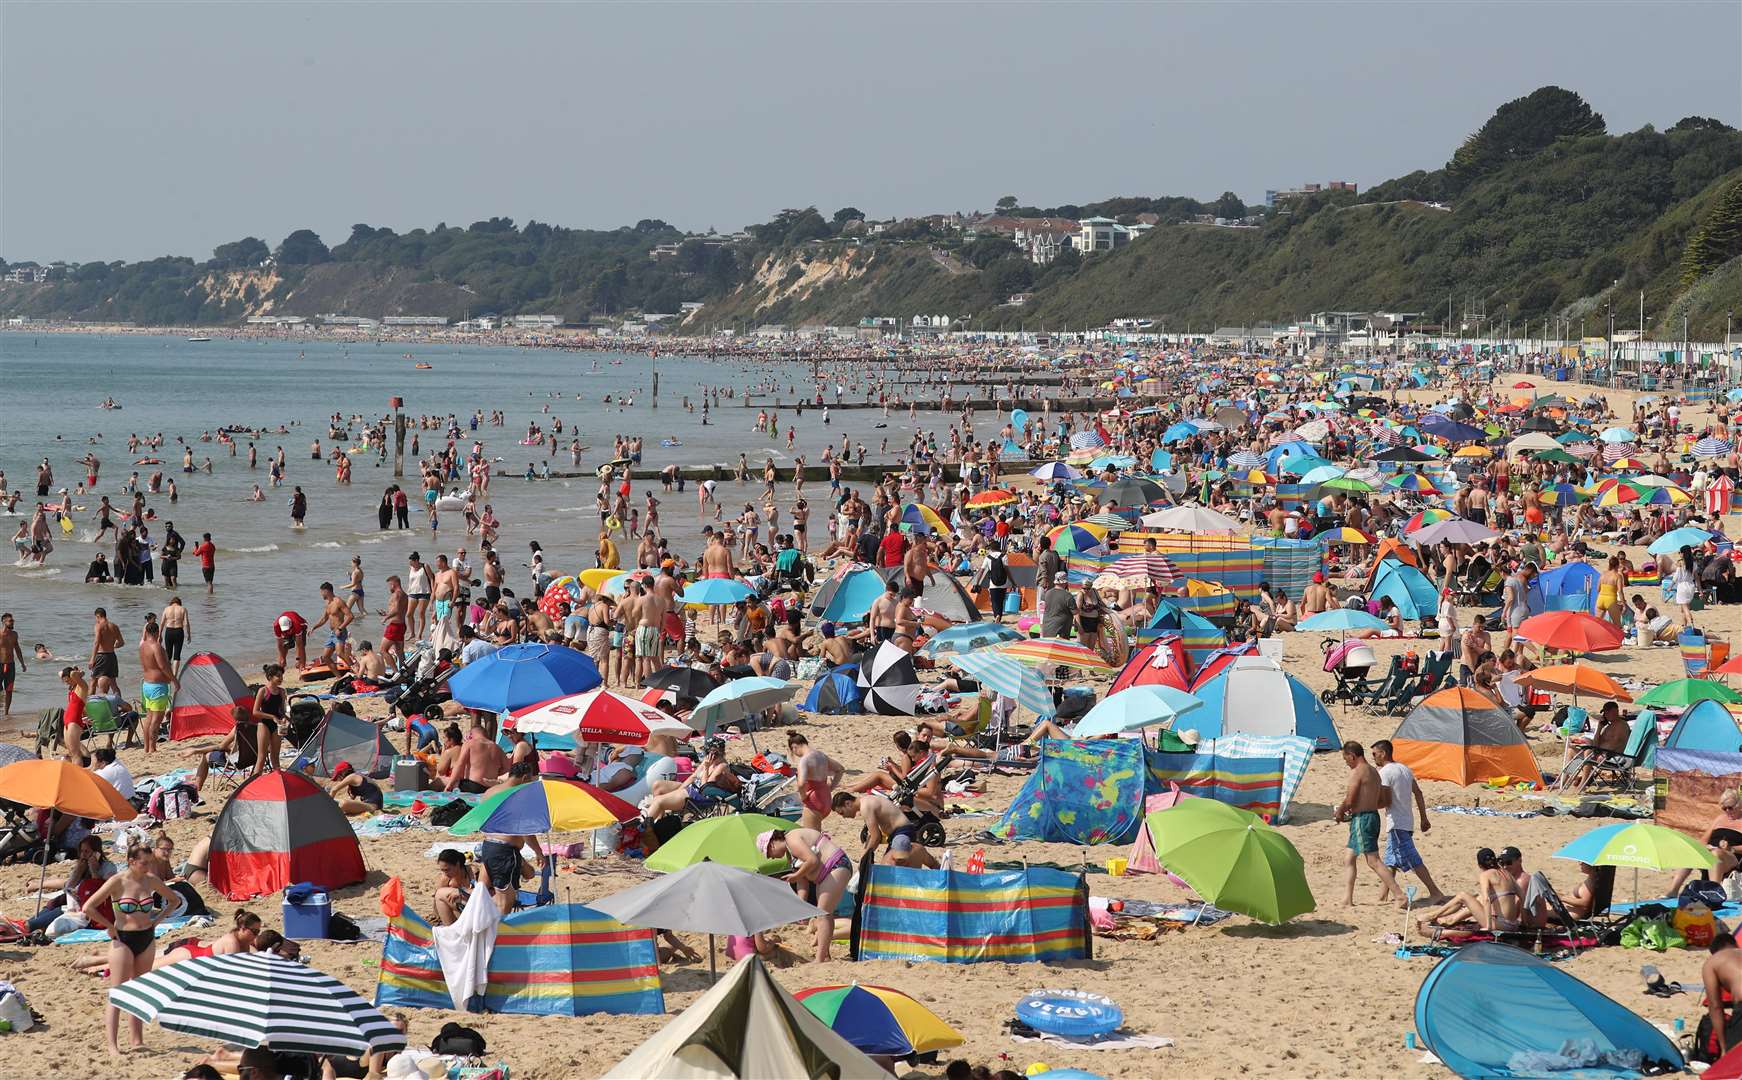 People enjoy the hot weather at Bournemouth beach in Dorset (Andrew Matthews/PA)